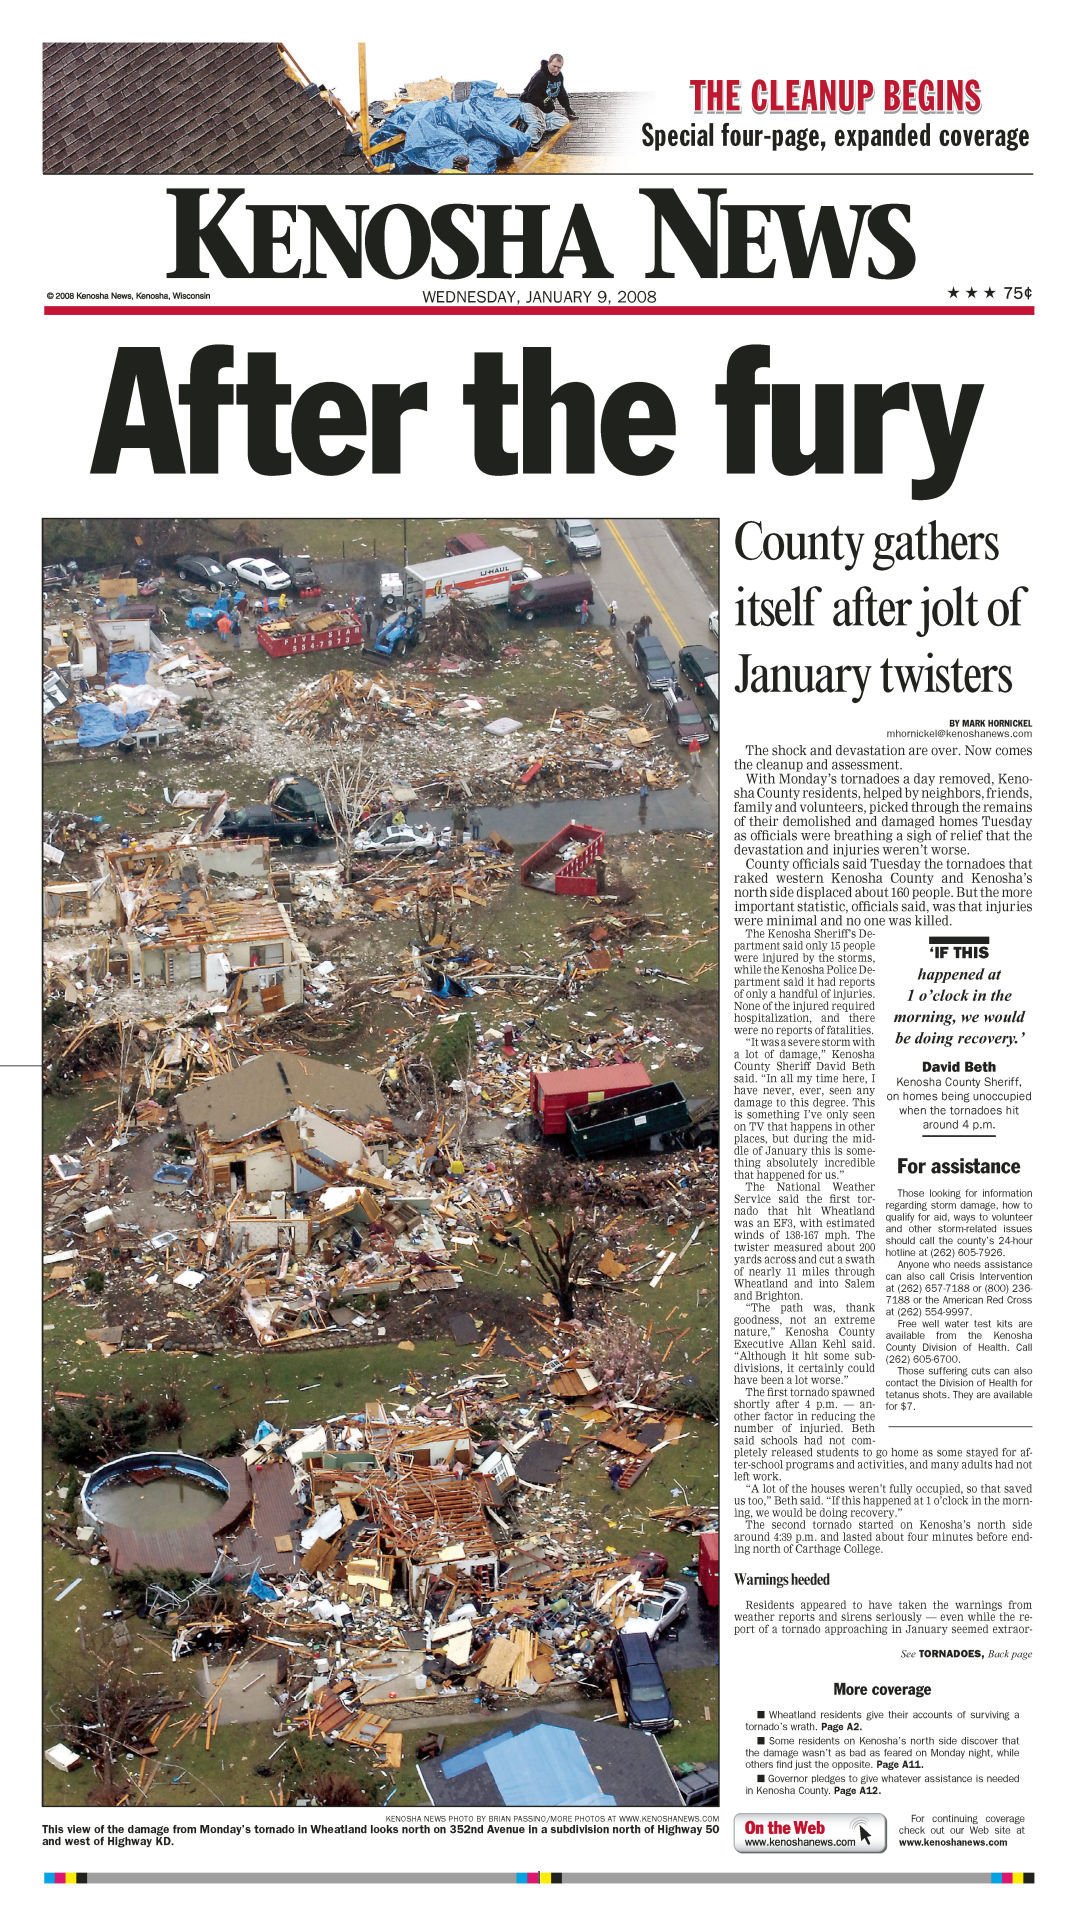 Natural Disasters Newspaper Reports Images All Disaster